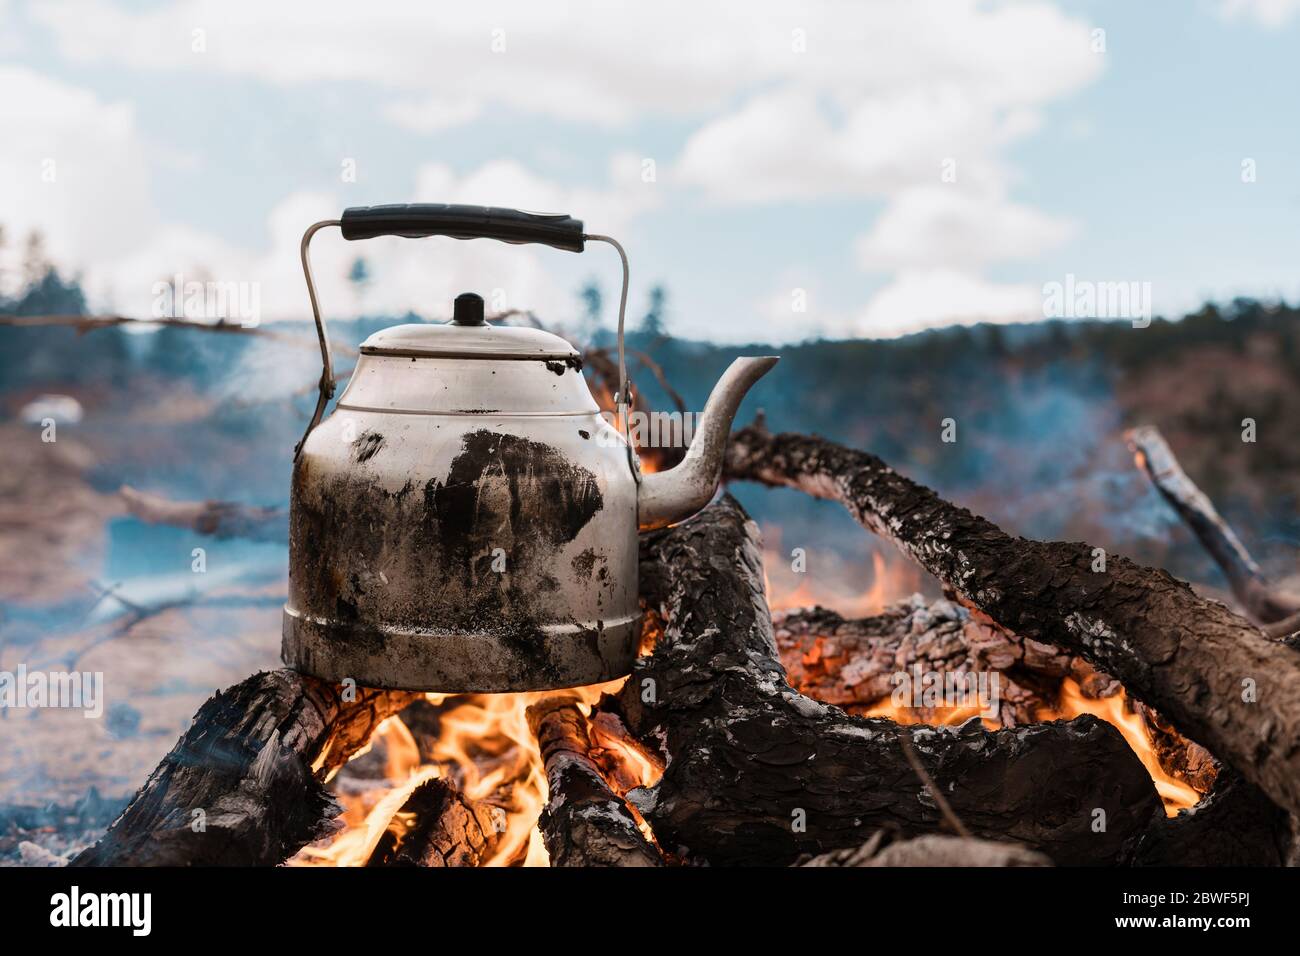 https://c8.alamy.com/comp/2BWF5PJ/boiling-water-on-a-camping-trip-with-fire-in-the-mountains-cooking-on-a-fire-with-firewood-kettle-on-fire-picnic-2BWF5PJ.jpg